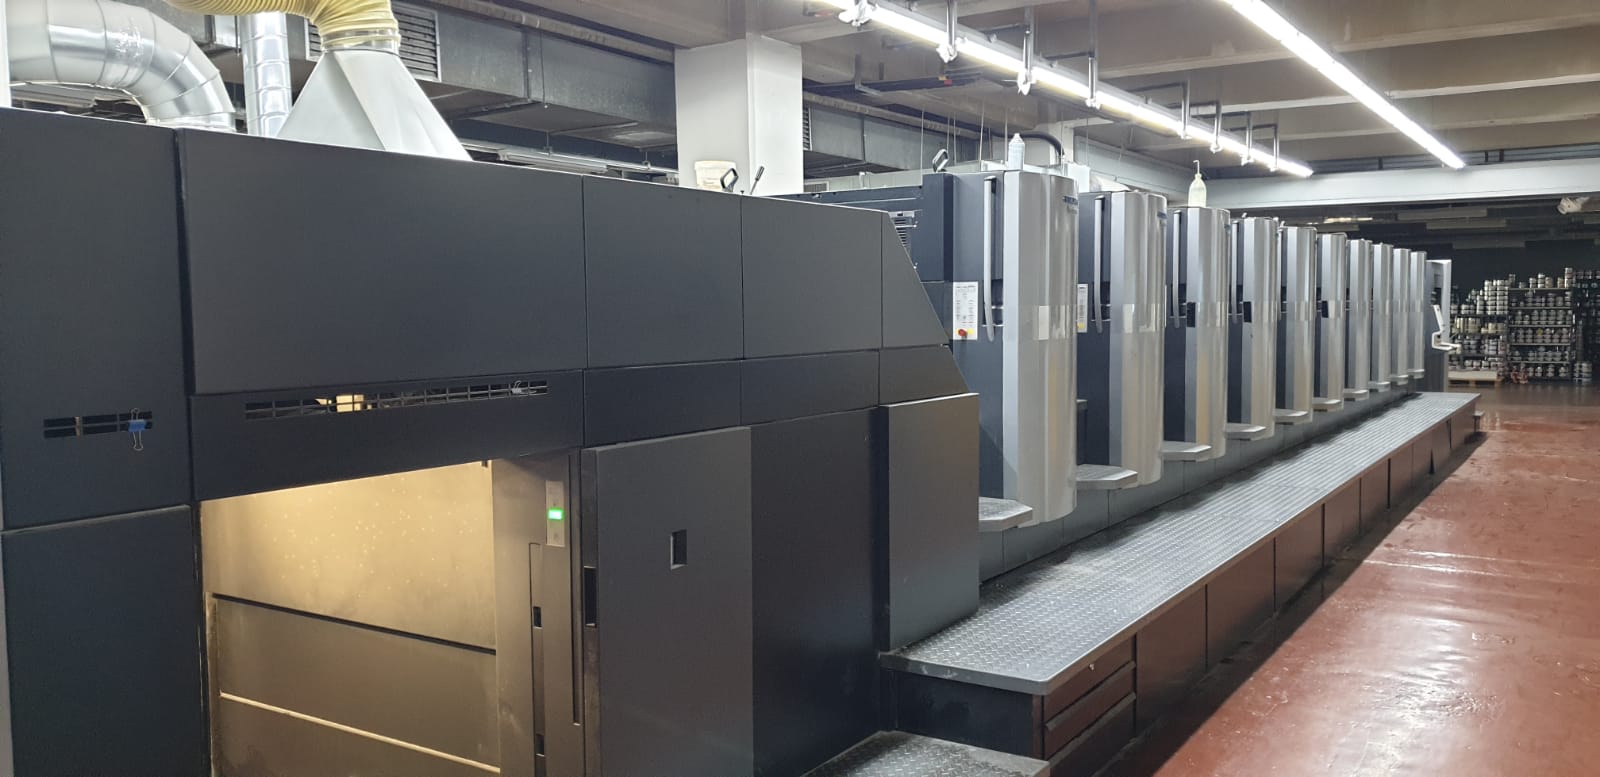 Used 9 - 12 colors - Sheetfed Offset Printing Press 